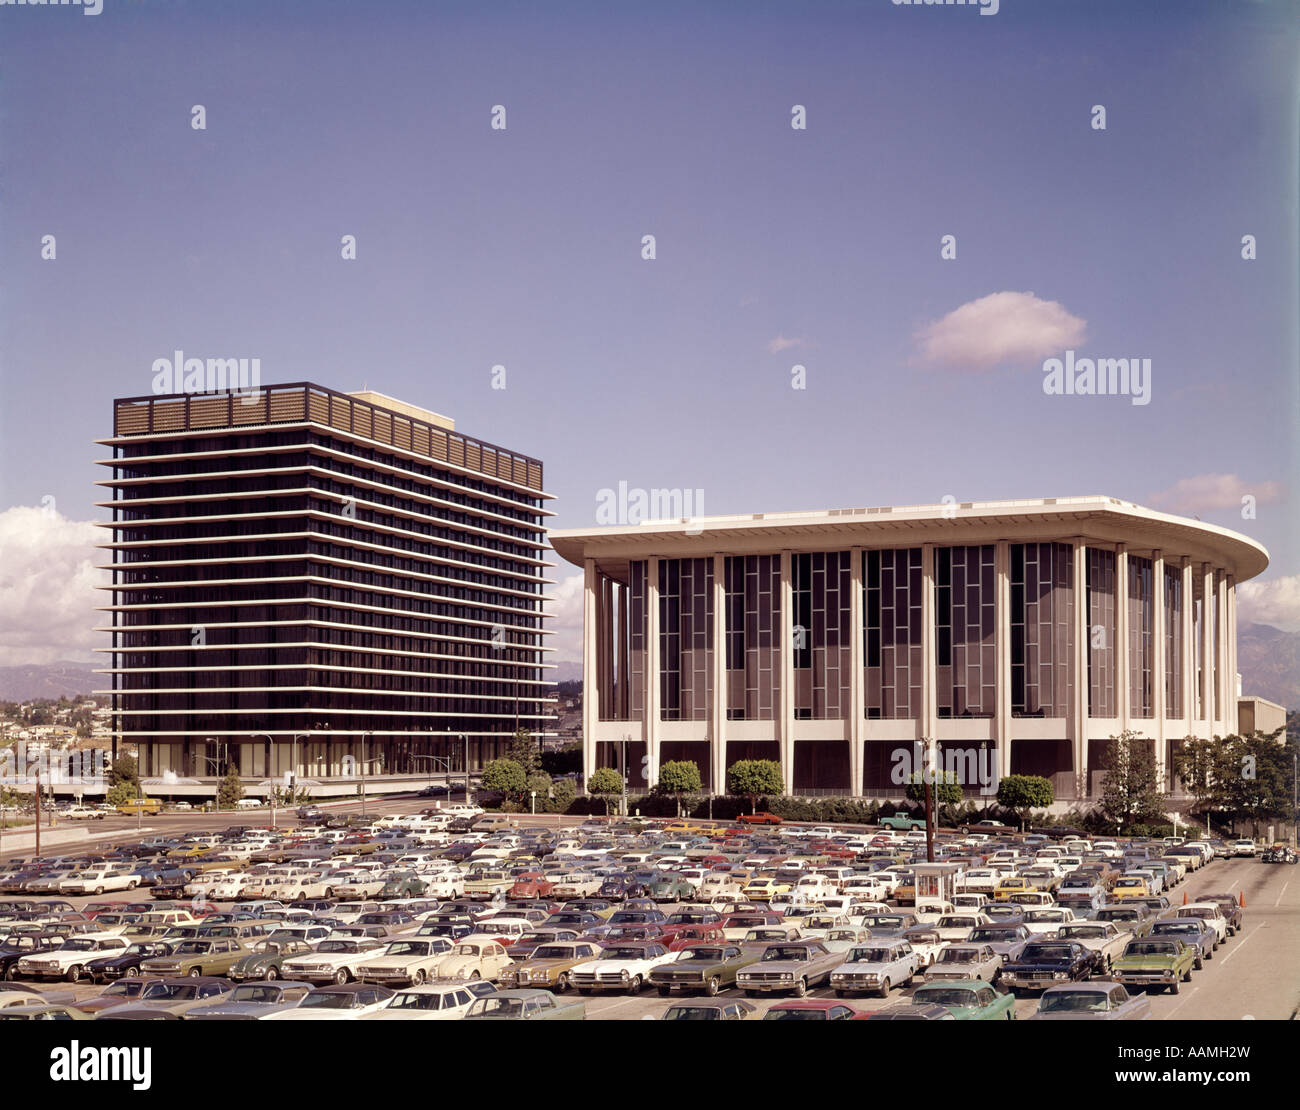 1960s MUSIC CENTER AND DOROTHY CHANDLER PAVILION PARKING LOT LOTS FULL OF CARS ARCHITECTURE RETRO VINTAGE Stock Photo